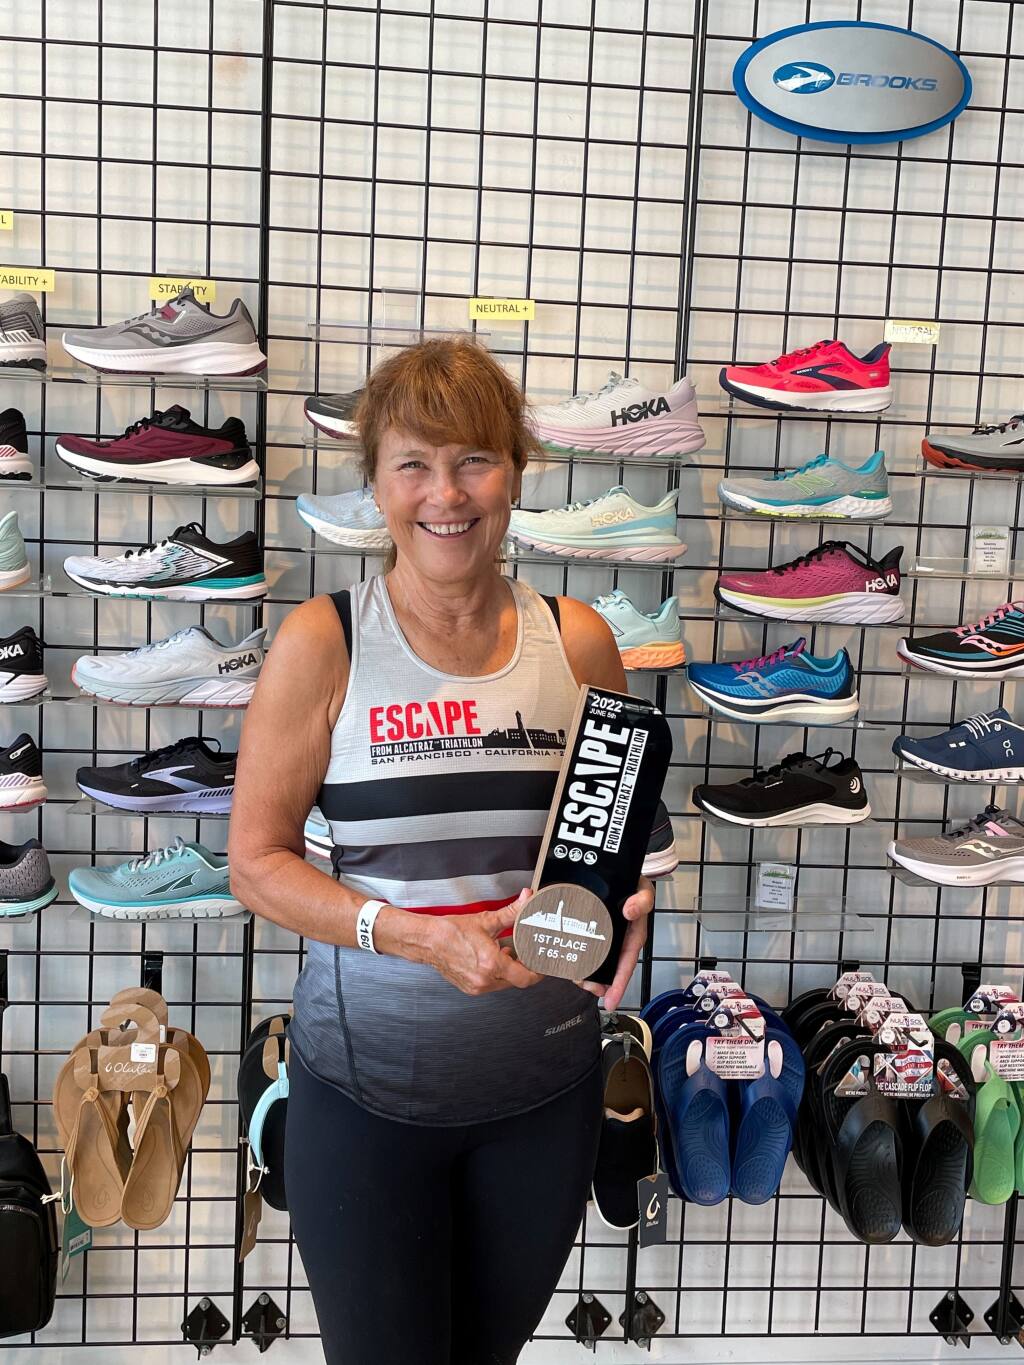 Petaluman Holly Wick with the trophy she won for being first in her age group in the Escape from Alcatraz Half Marathon. Wick is ranked No. 1 the world in her age group for the event. June 8, 2022 (SUBMITTED PHOTO)